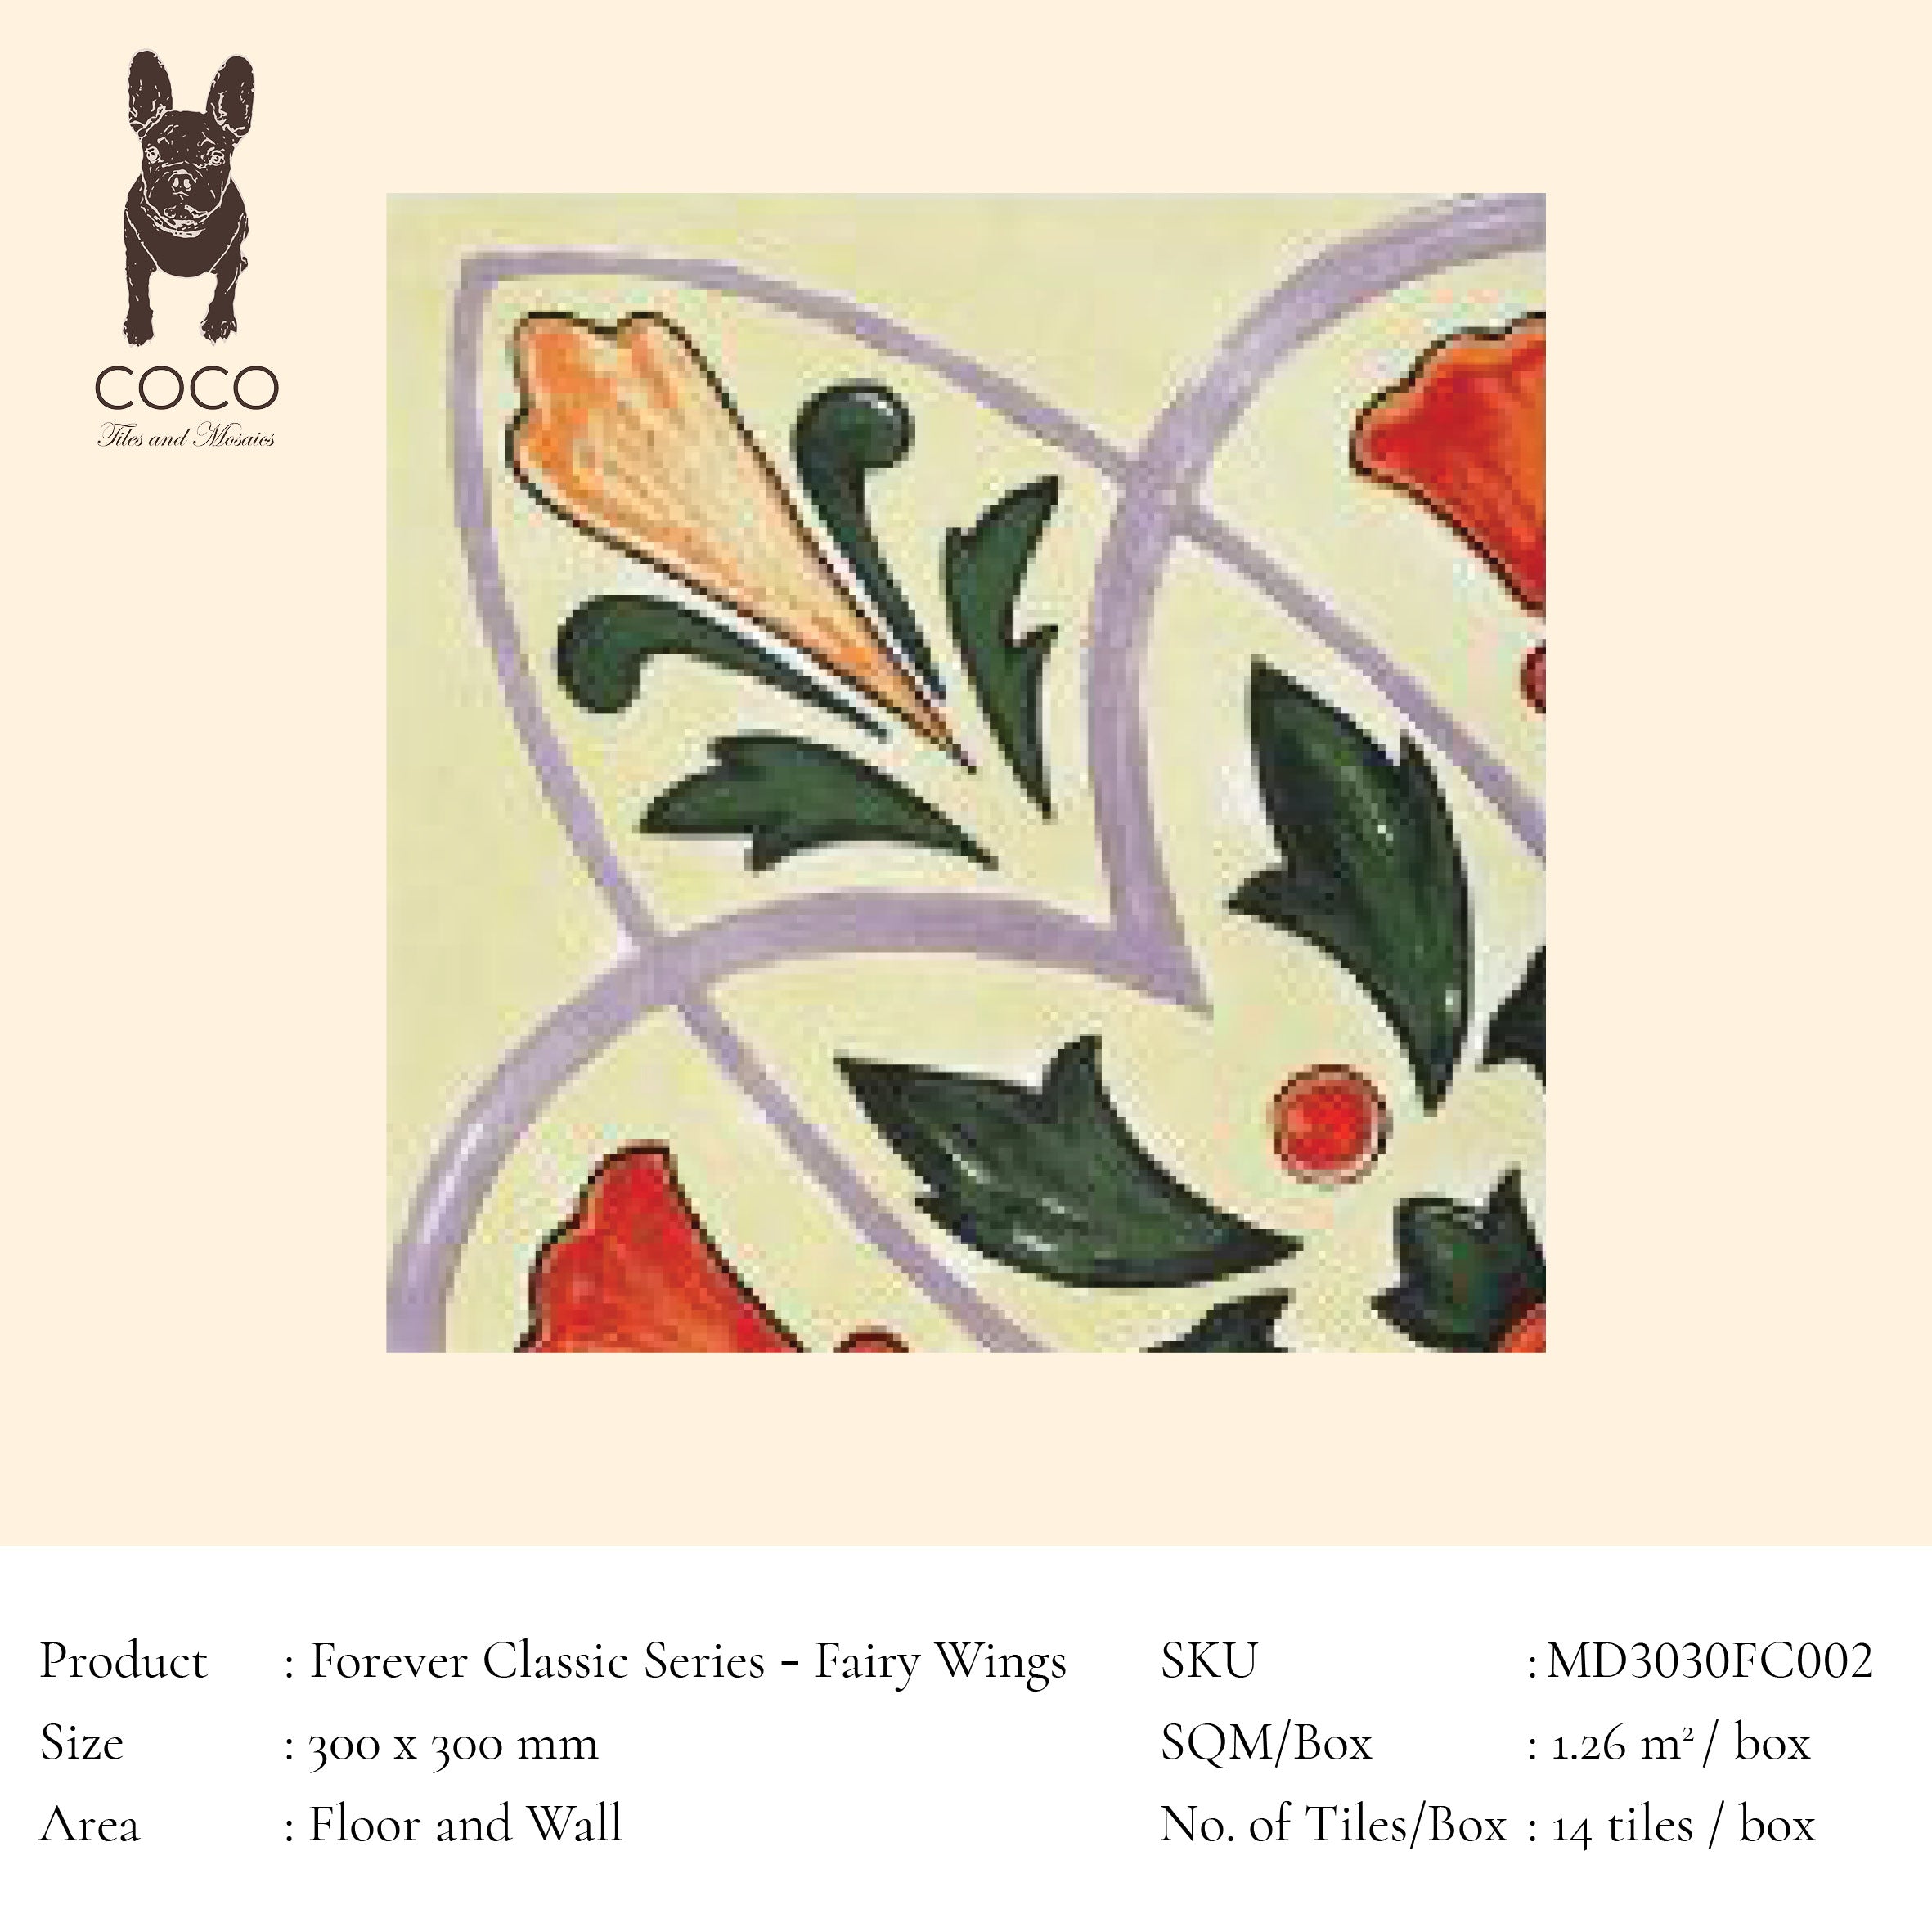 Forever Classic Series - Fairy Wings 300x300mm Ceramic Tile